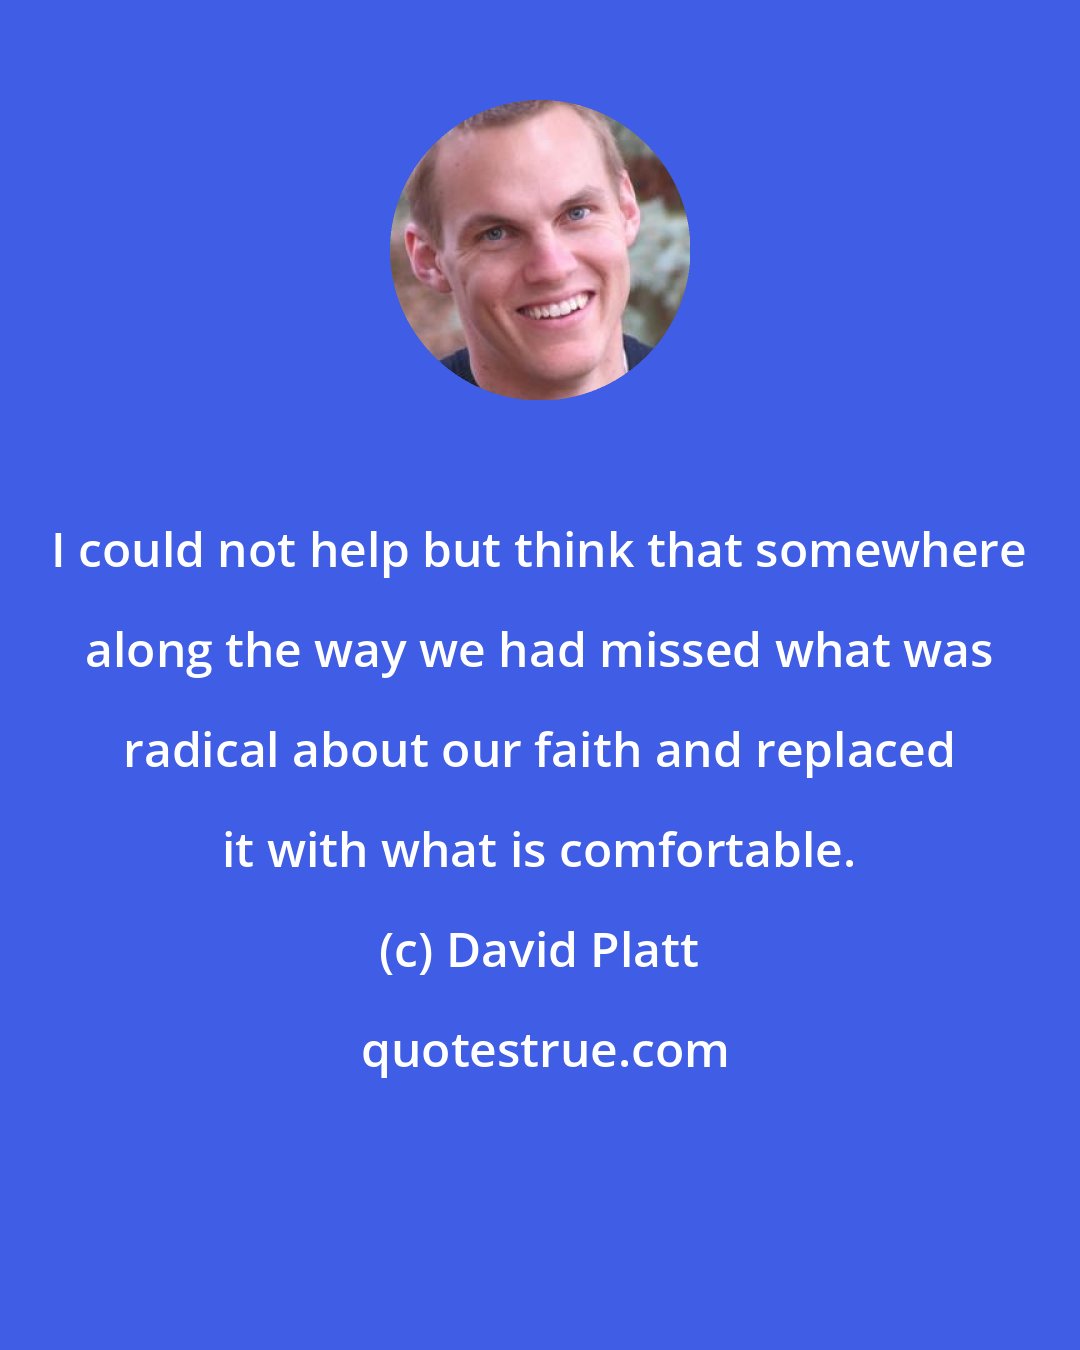 David Platt: I could not help but think that somewhere along the way we had missed what was radical about our faith and replaced it with what is comfortable.